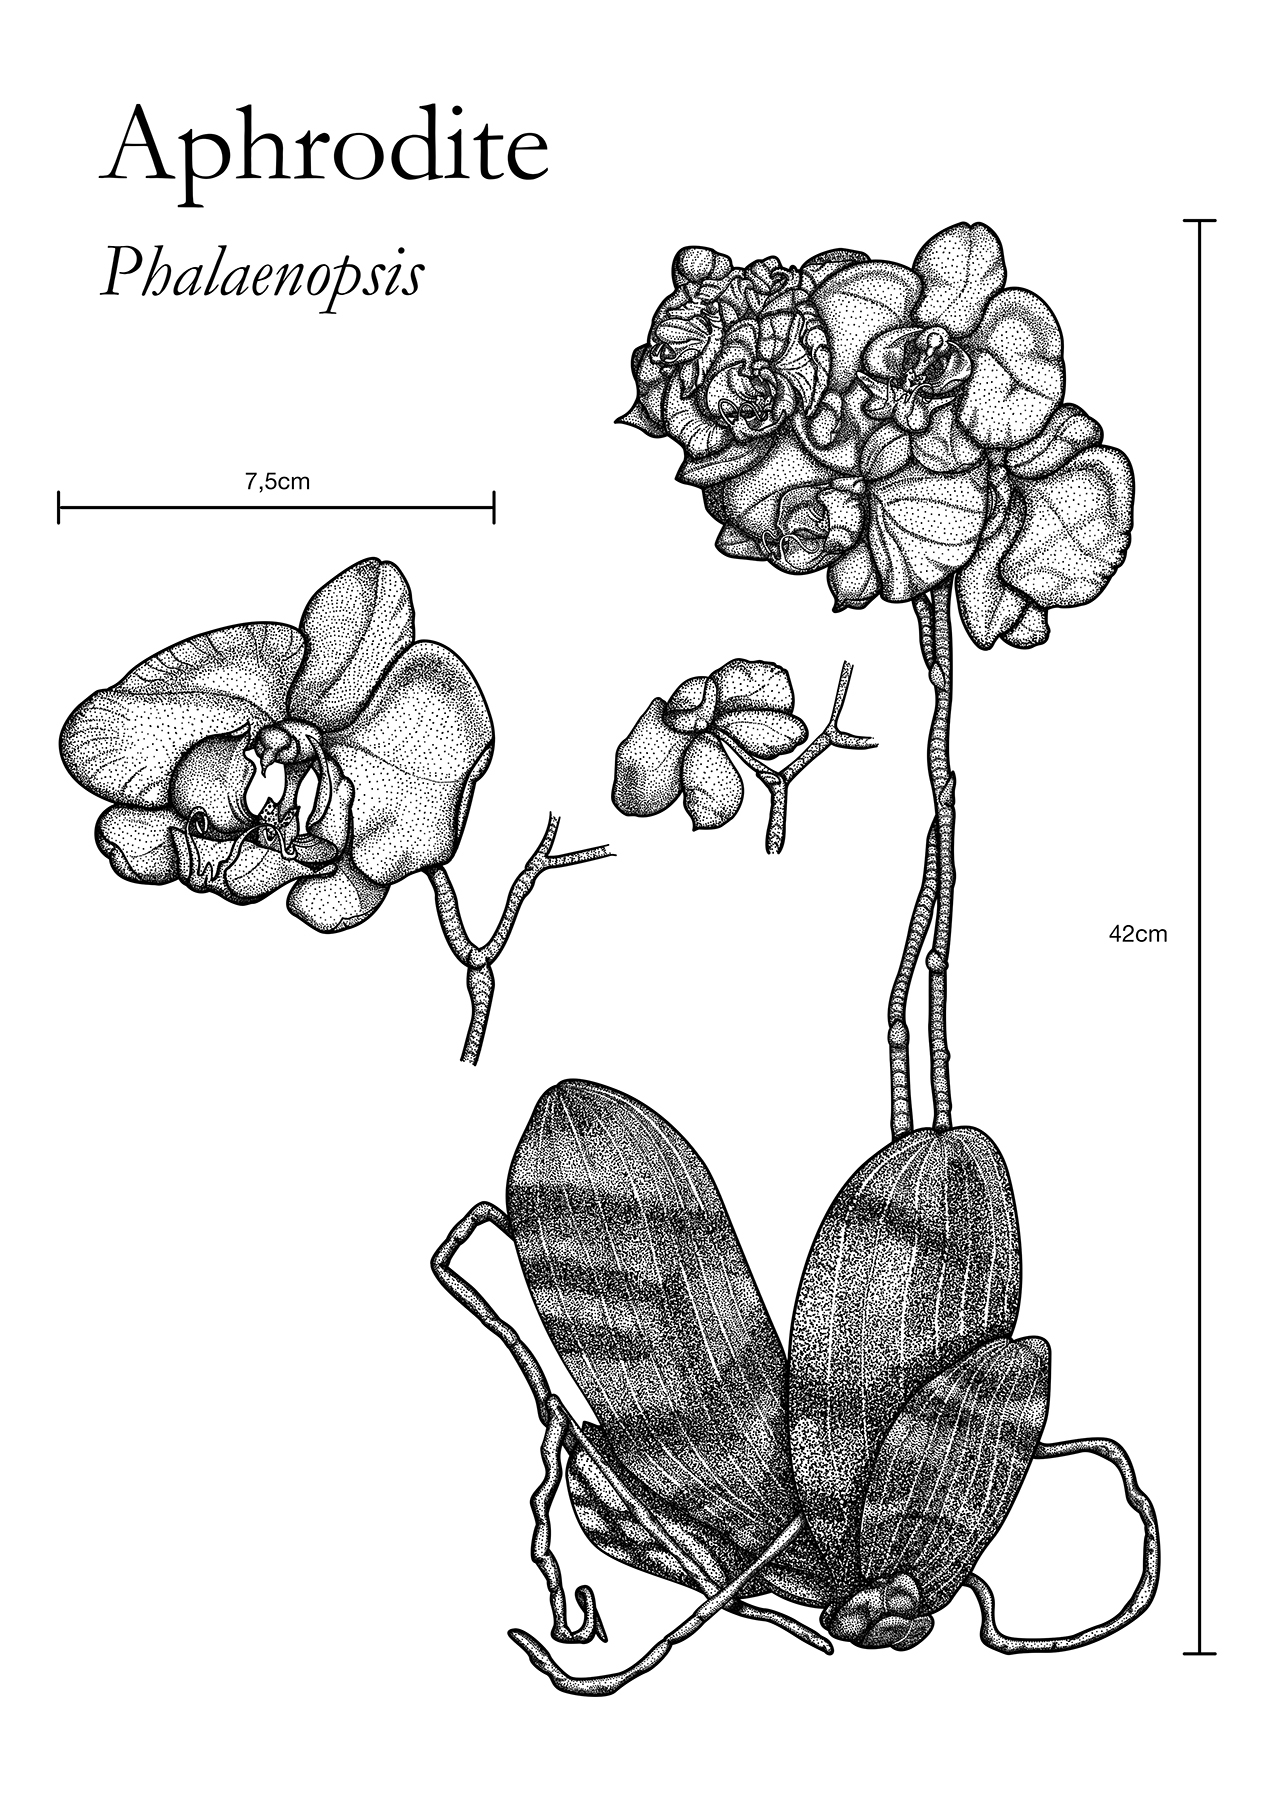 The Aphrodite is a flower known as moth orchids abbreviated Phal in the horticultural trade is an orchid genus and is one of the most popular orchids in the trade through the development of many artificial hybrids It is native to southern China Taiwan the